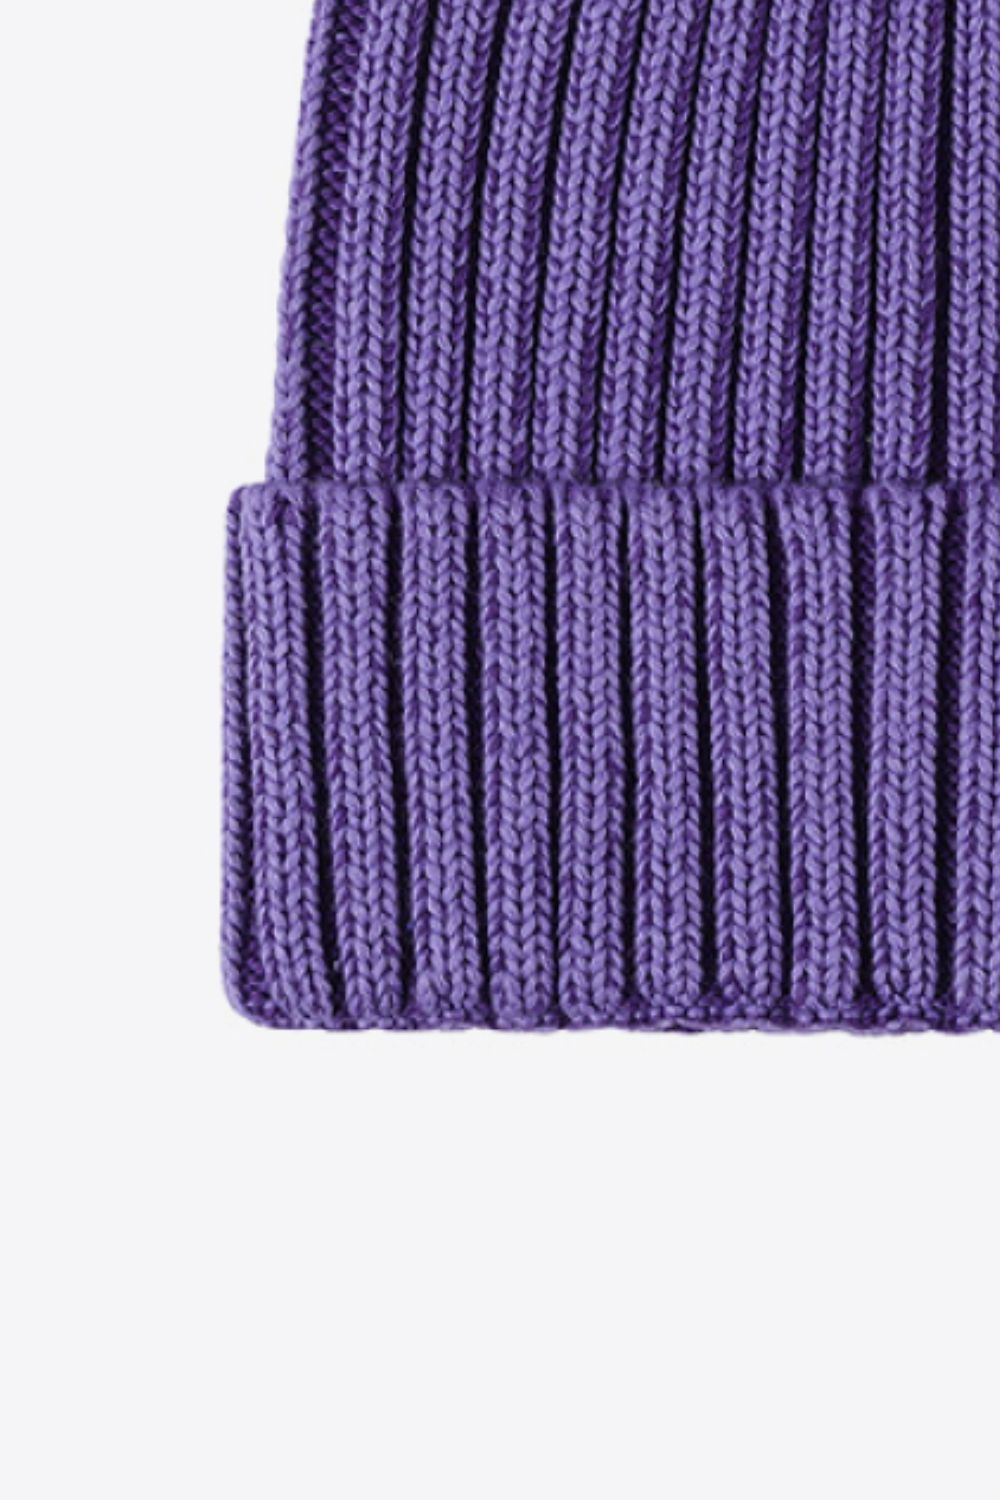 Soft and Comfortable Cuffed Beanie